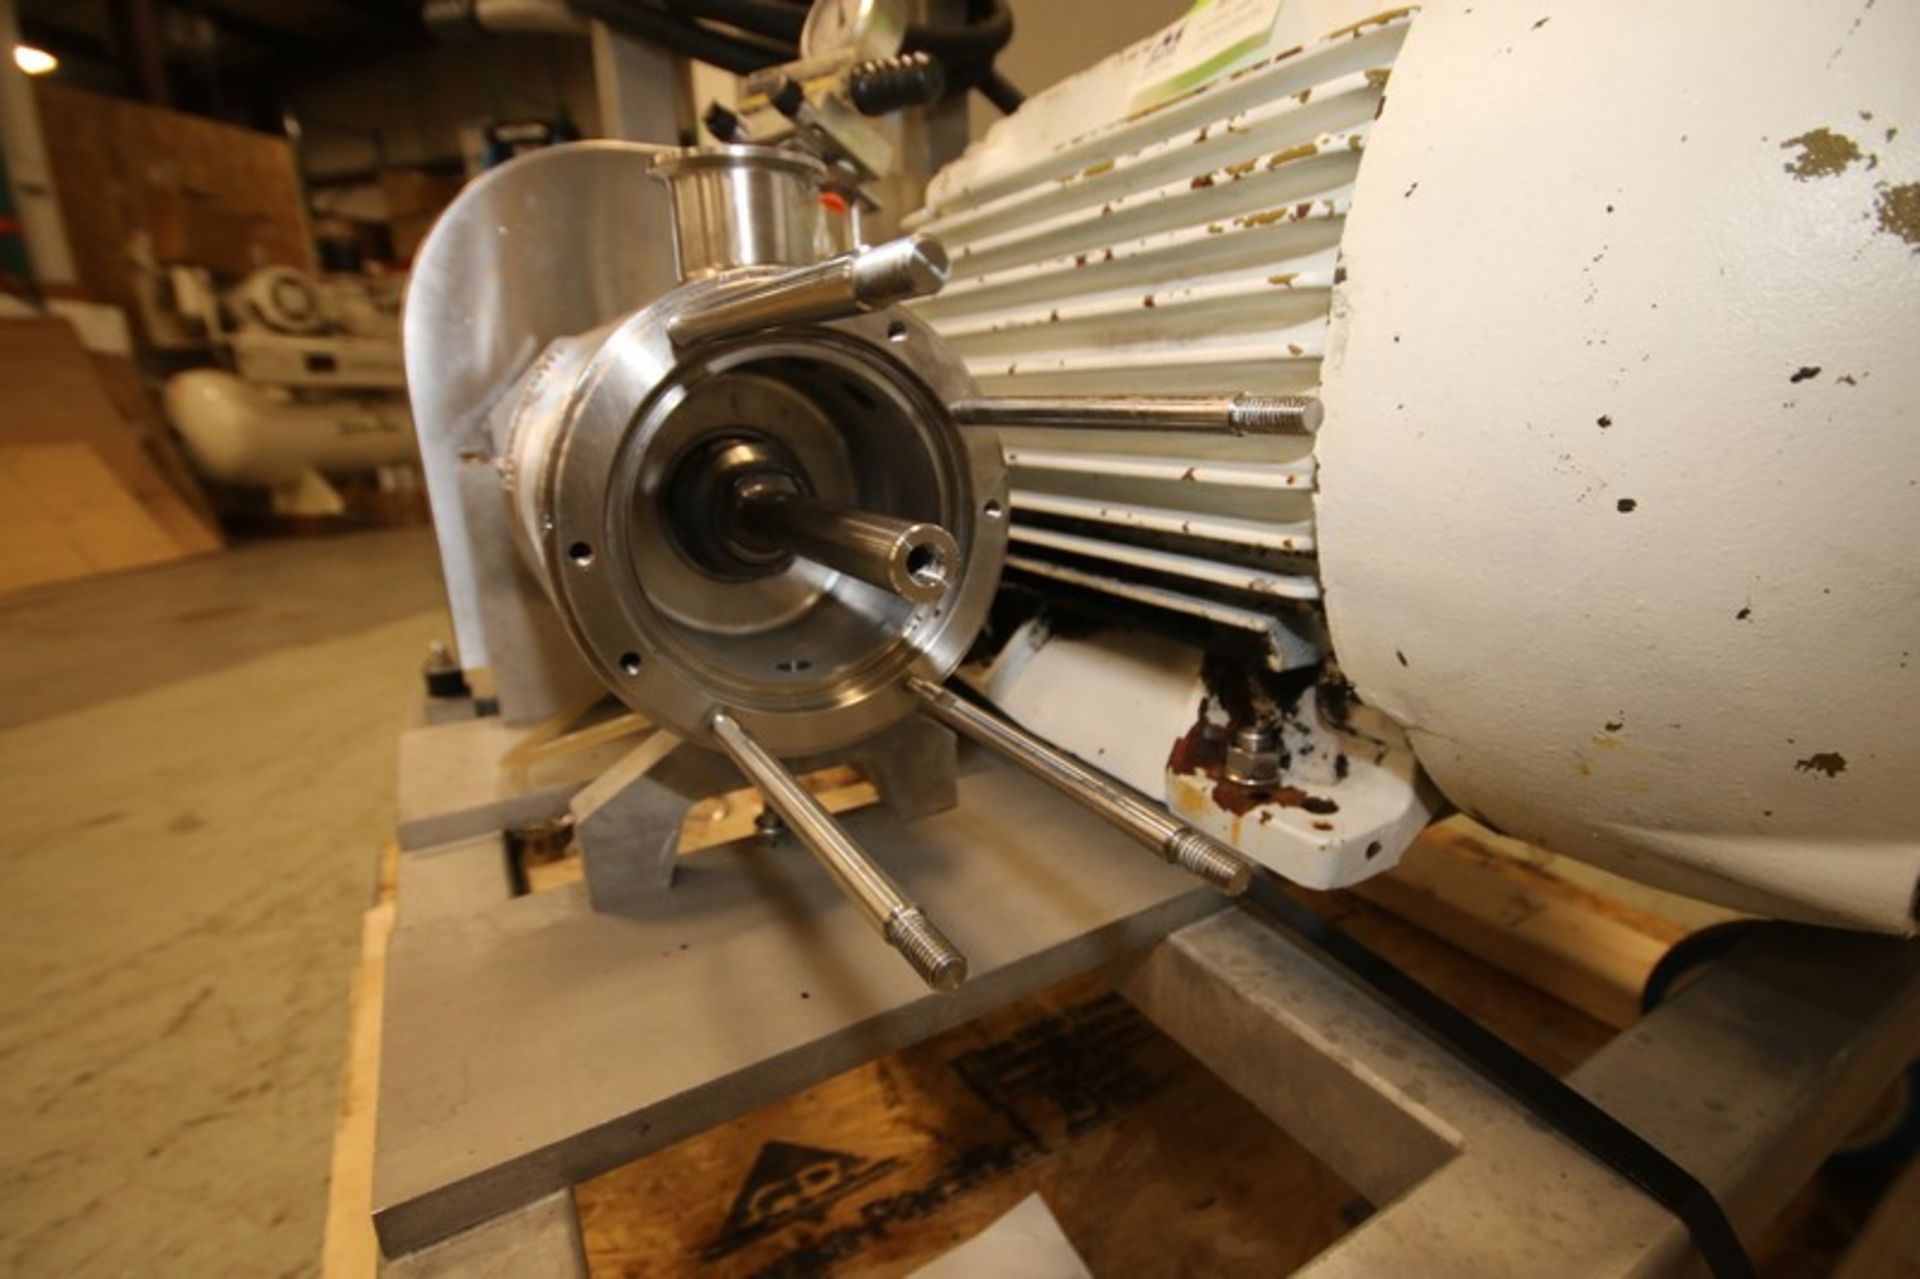 2020 Admix Boston S/S Shear Mill, Model QS-37-3, SN 66870-2, with 40 hp / 3545/5400 rpm Motor, 460 - Image 2 of 8